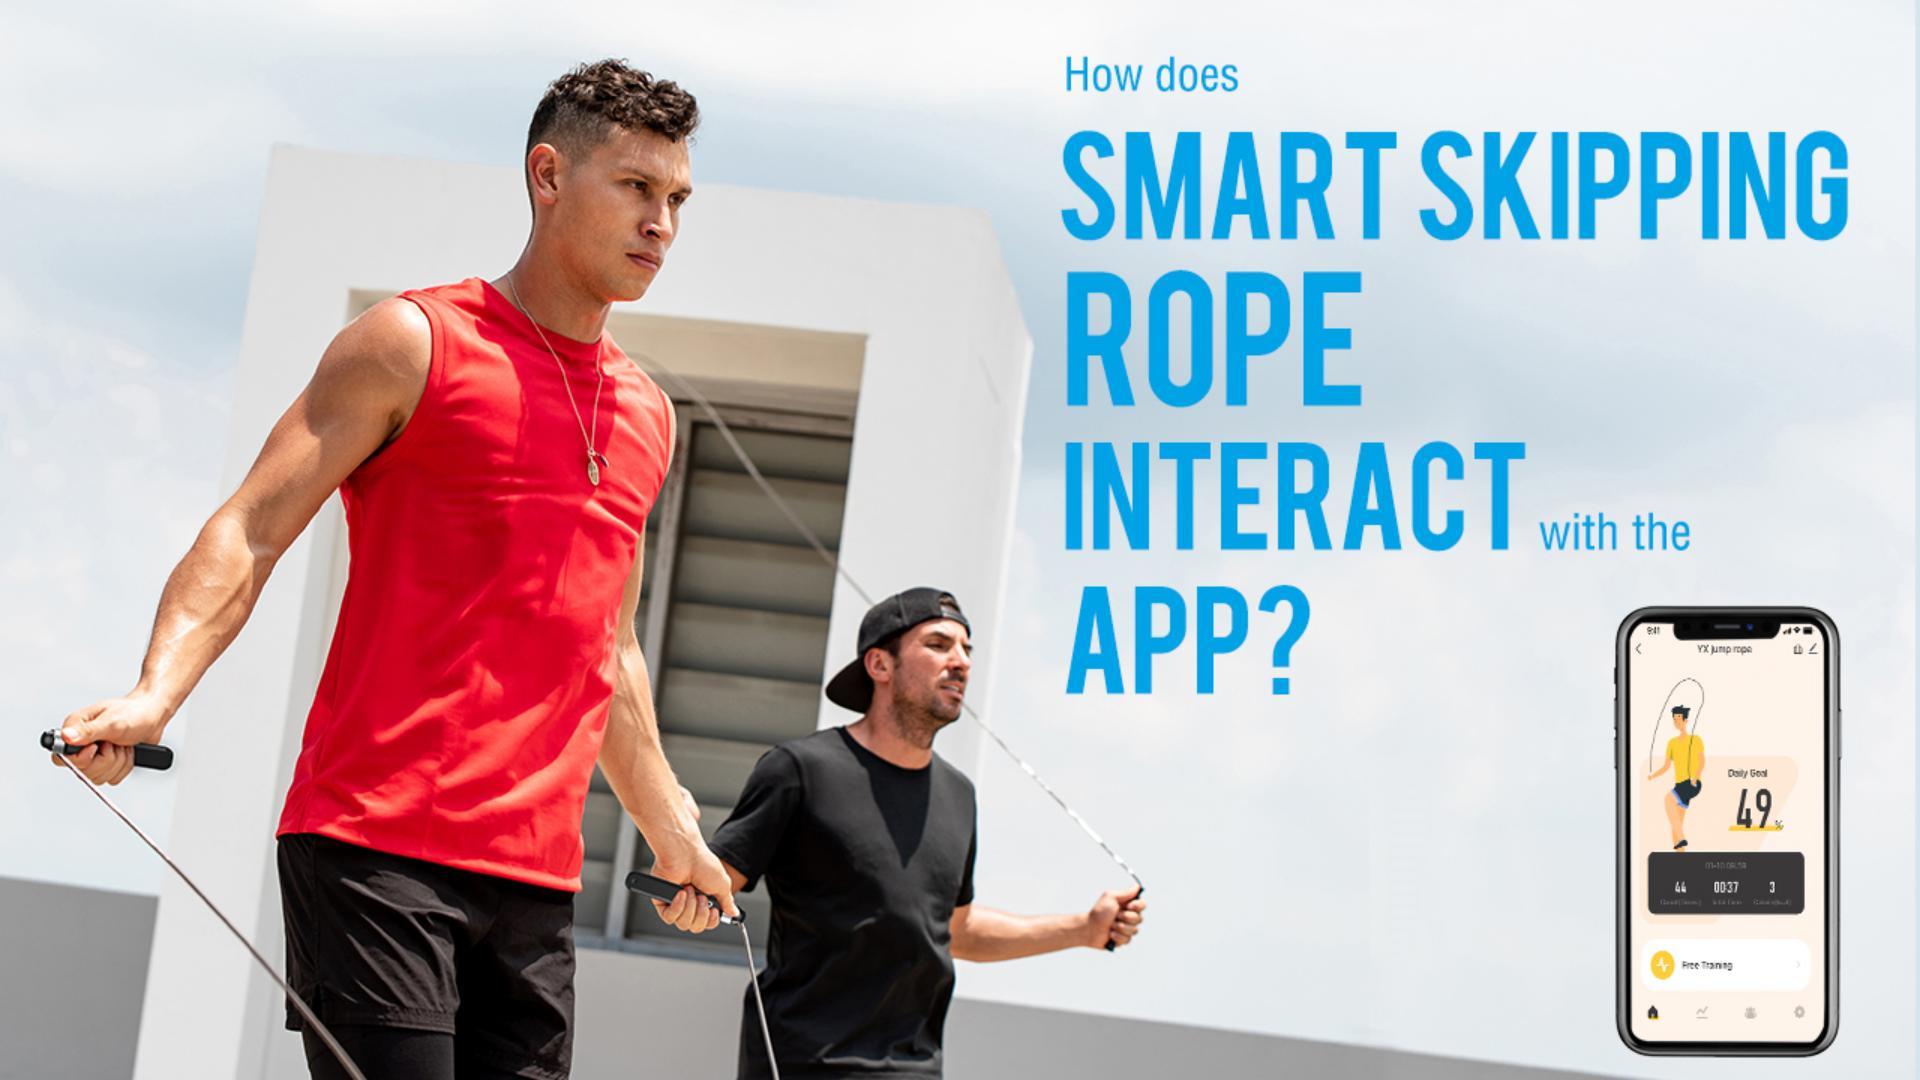 How does the smart skipping rope interact with the smart life app